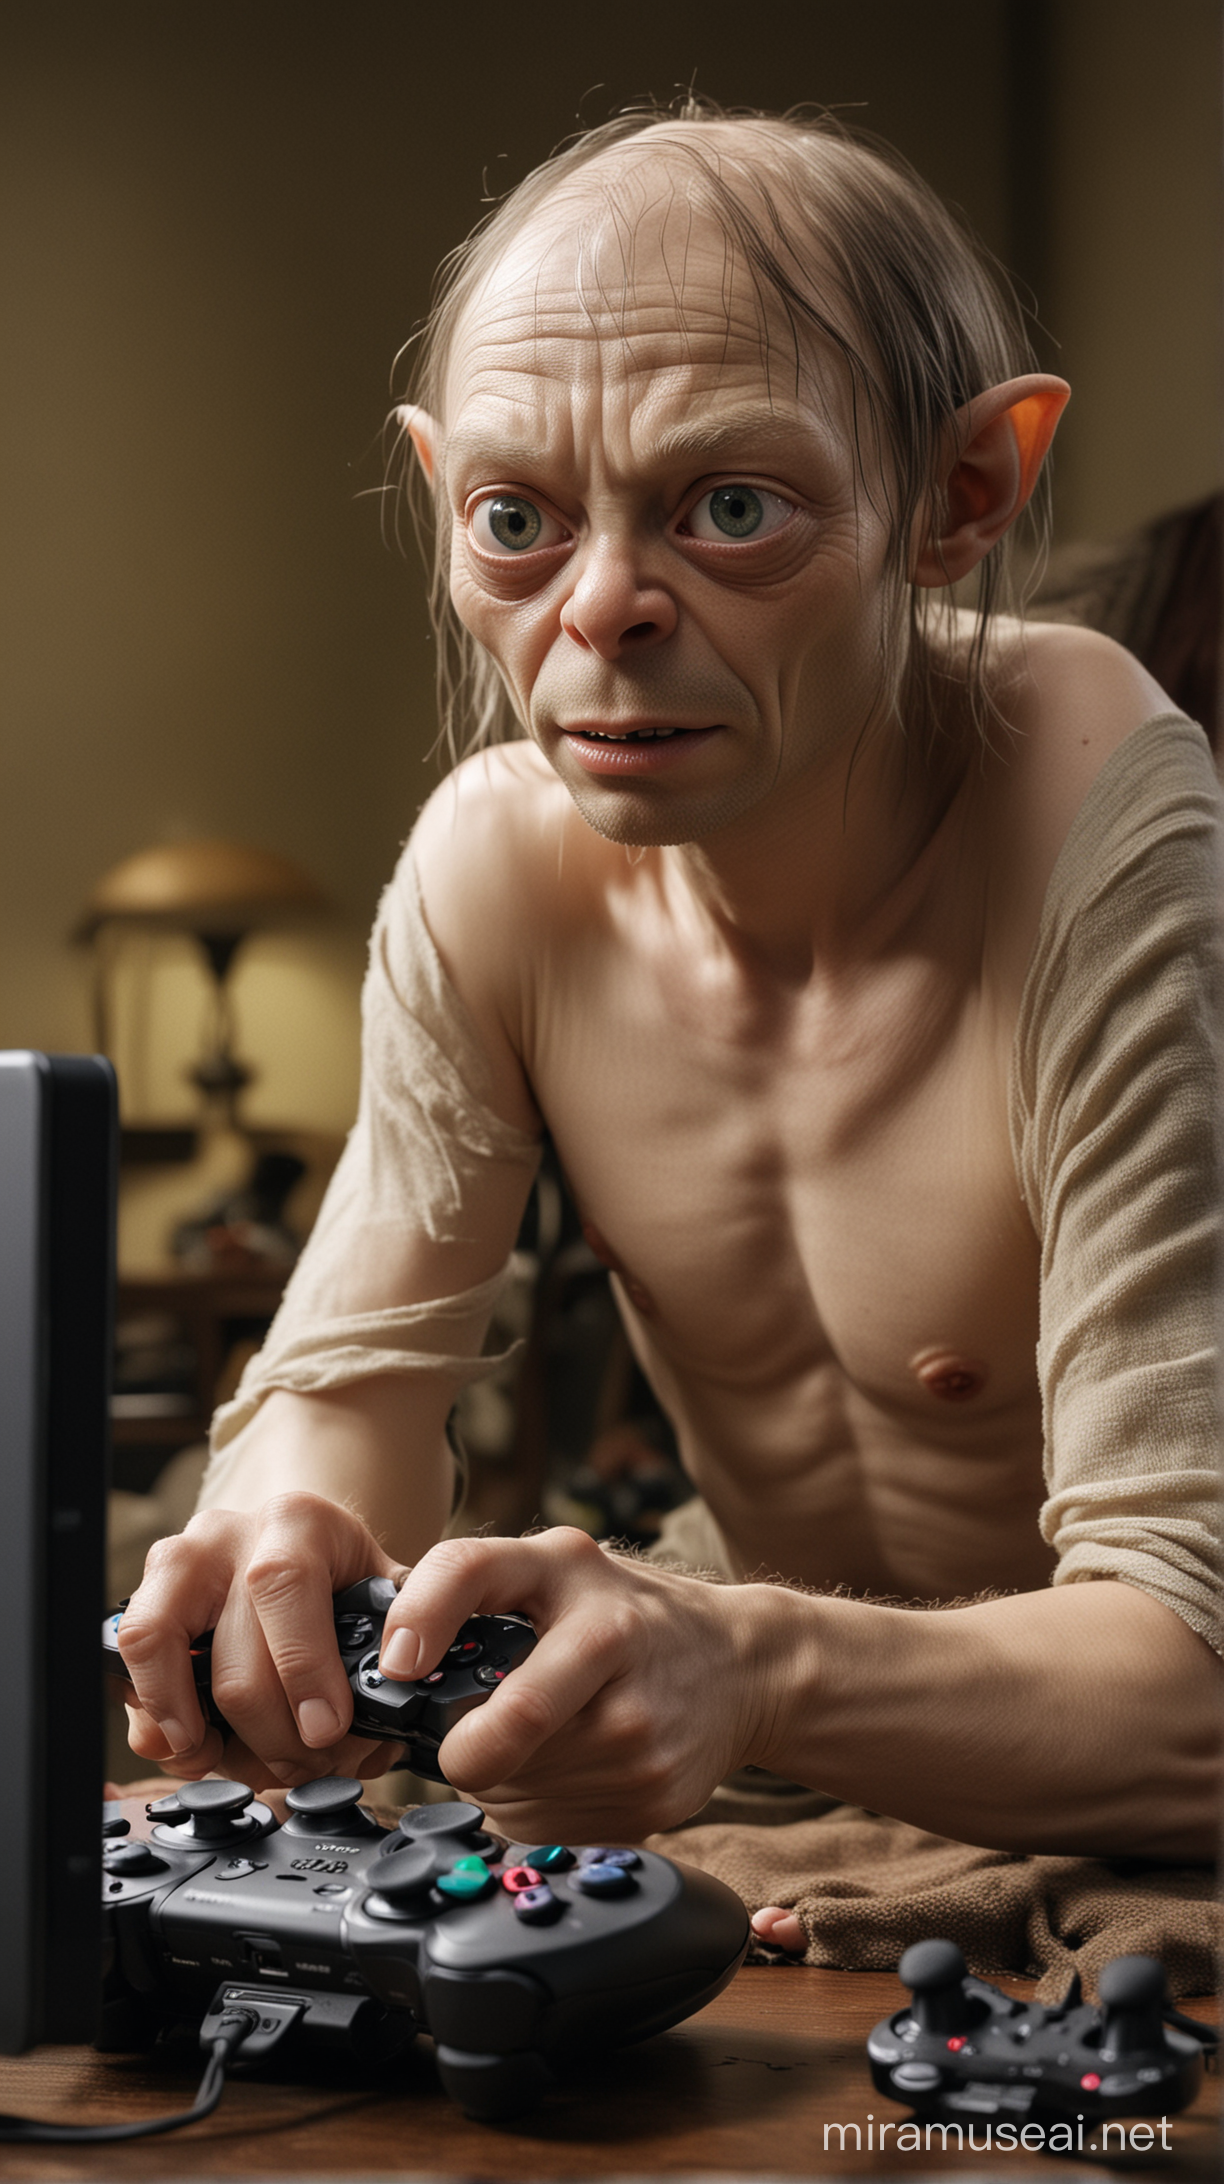 Gollum Playing Playstation Captivating Documentary Image of Fictional Character Engaged in Modern Entertainment